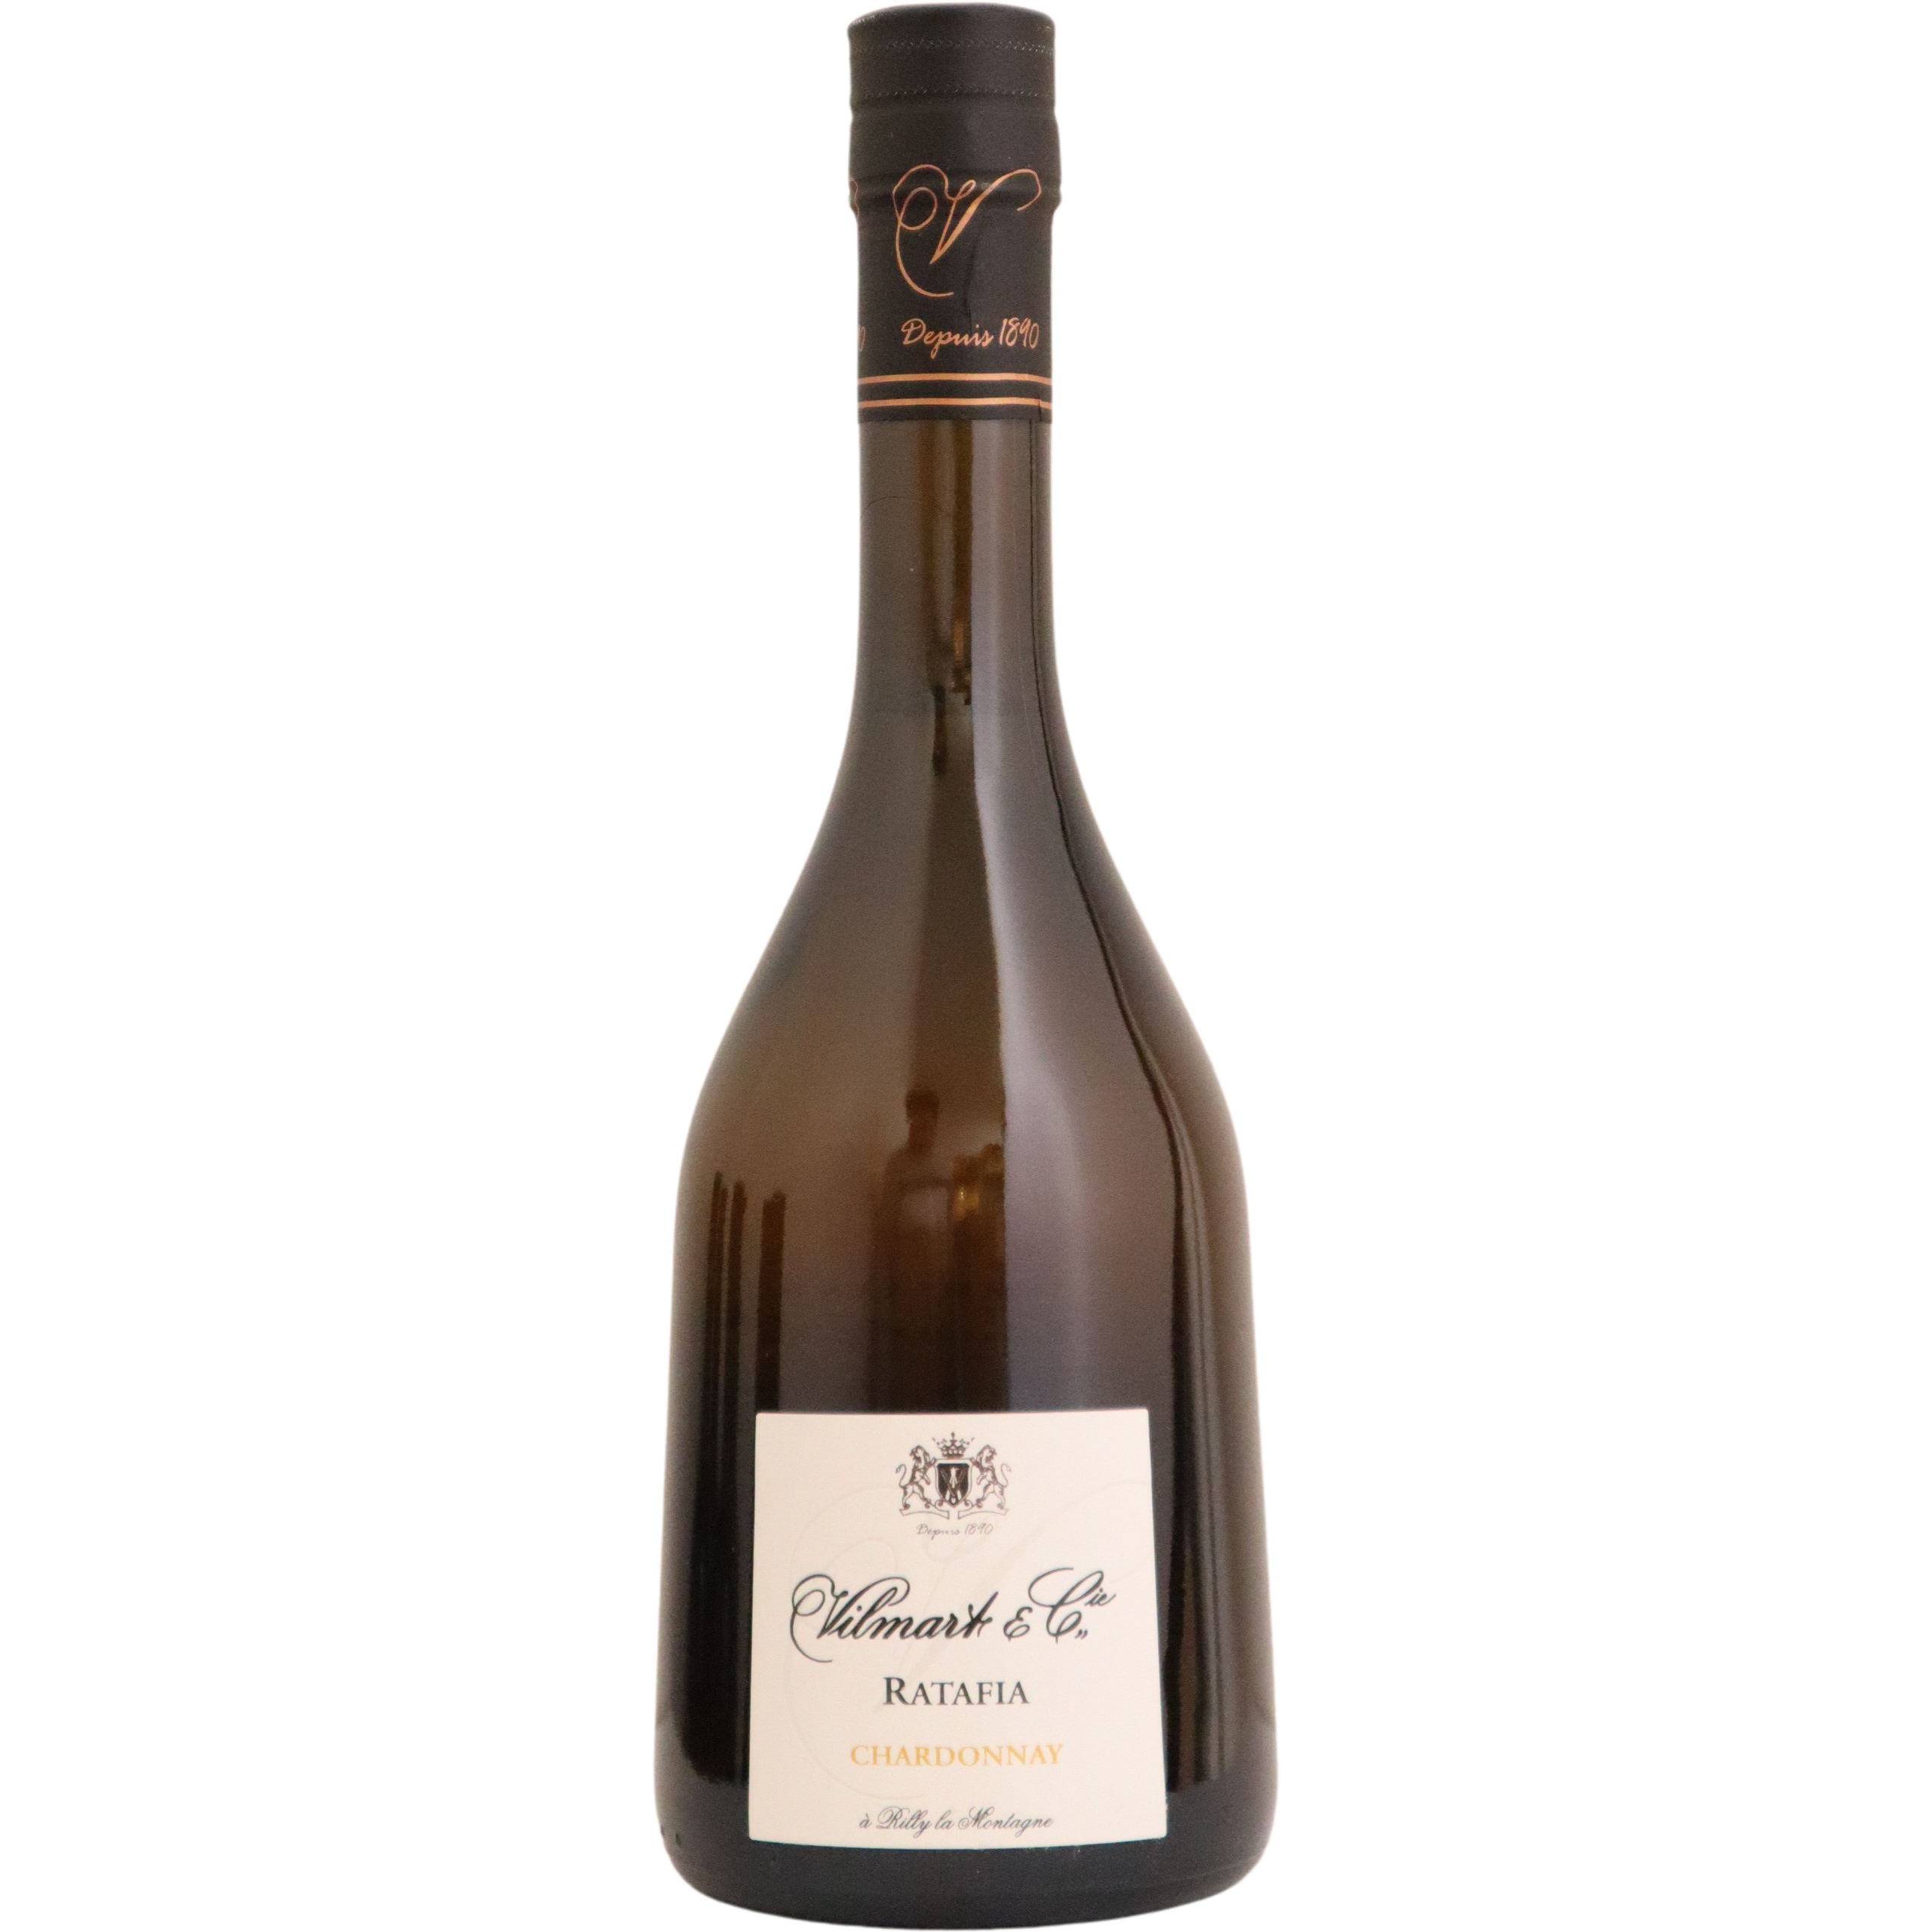 The best ratafia de Champagne to pair with food